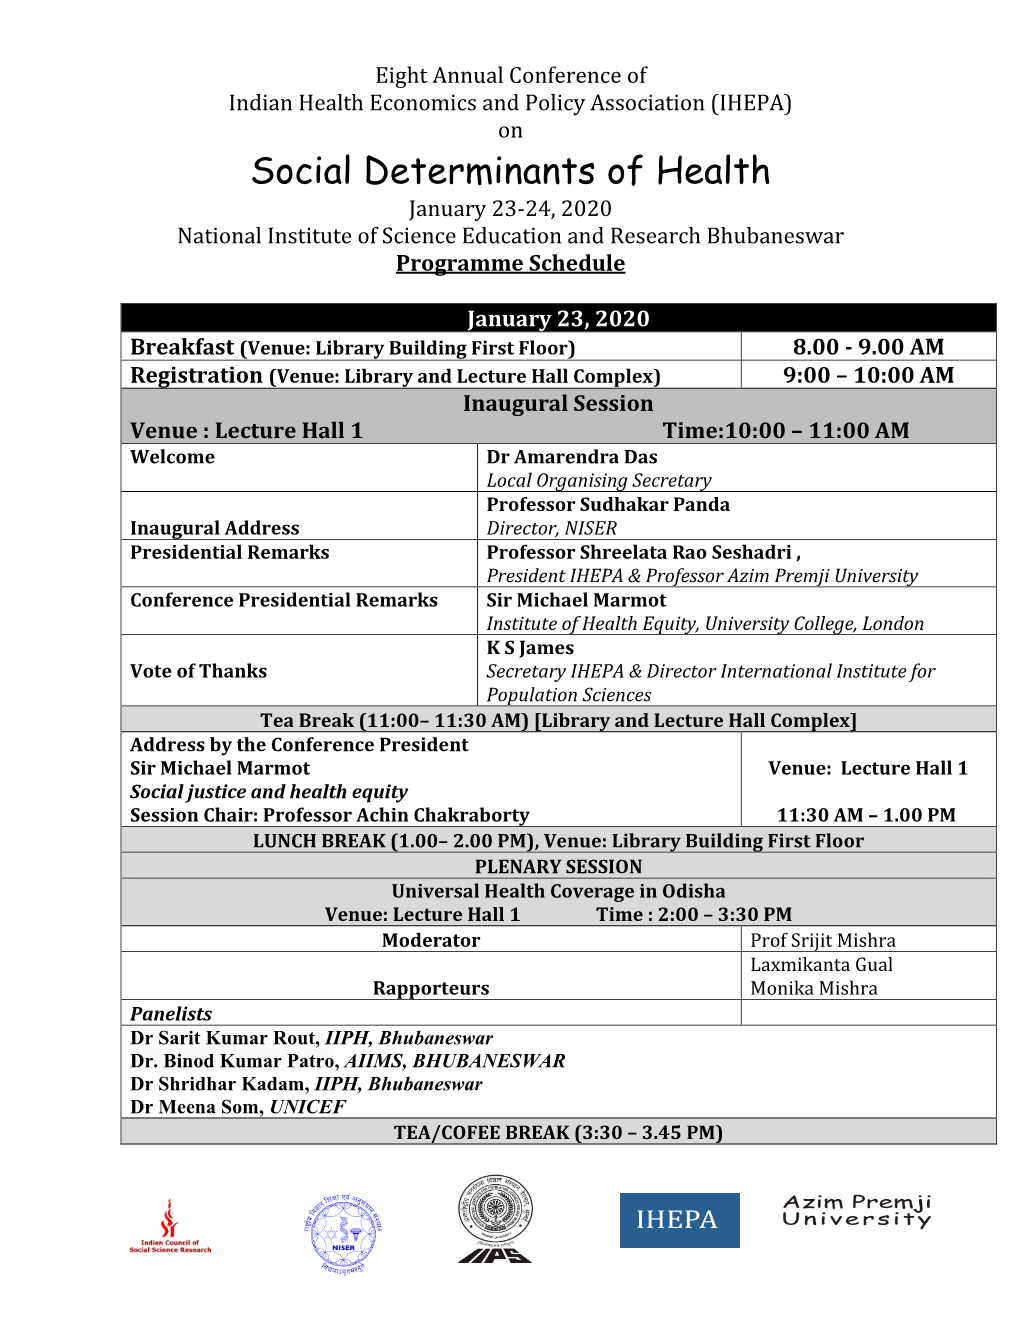 Social Determinants of Health January 23-24, 2020 National Institute of Science Education and Research Bhubaneswar Programme Schedule